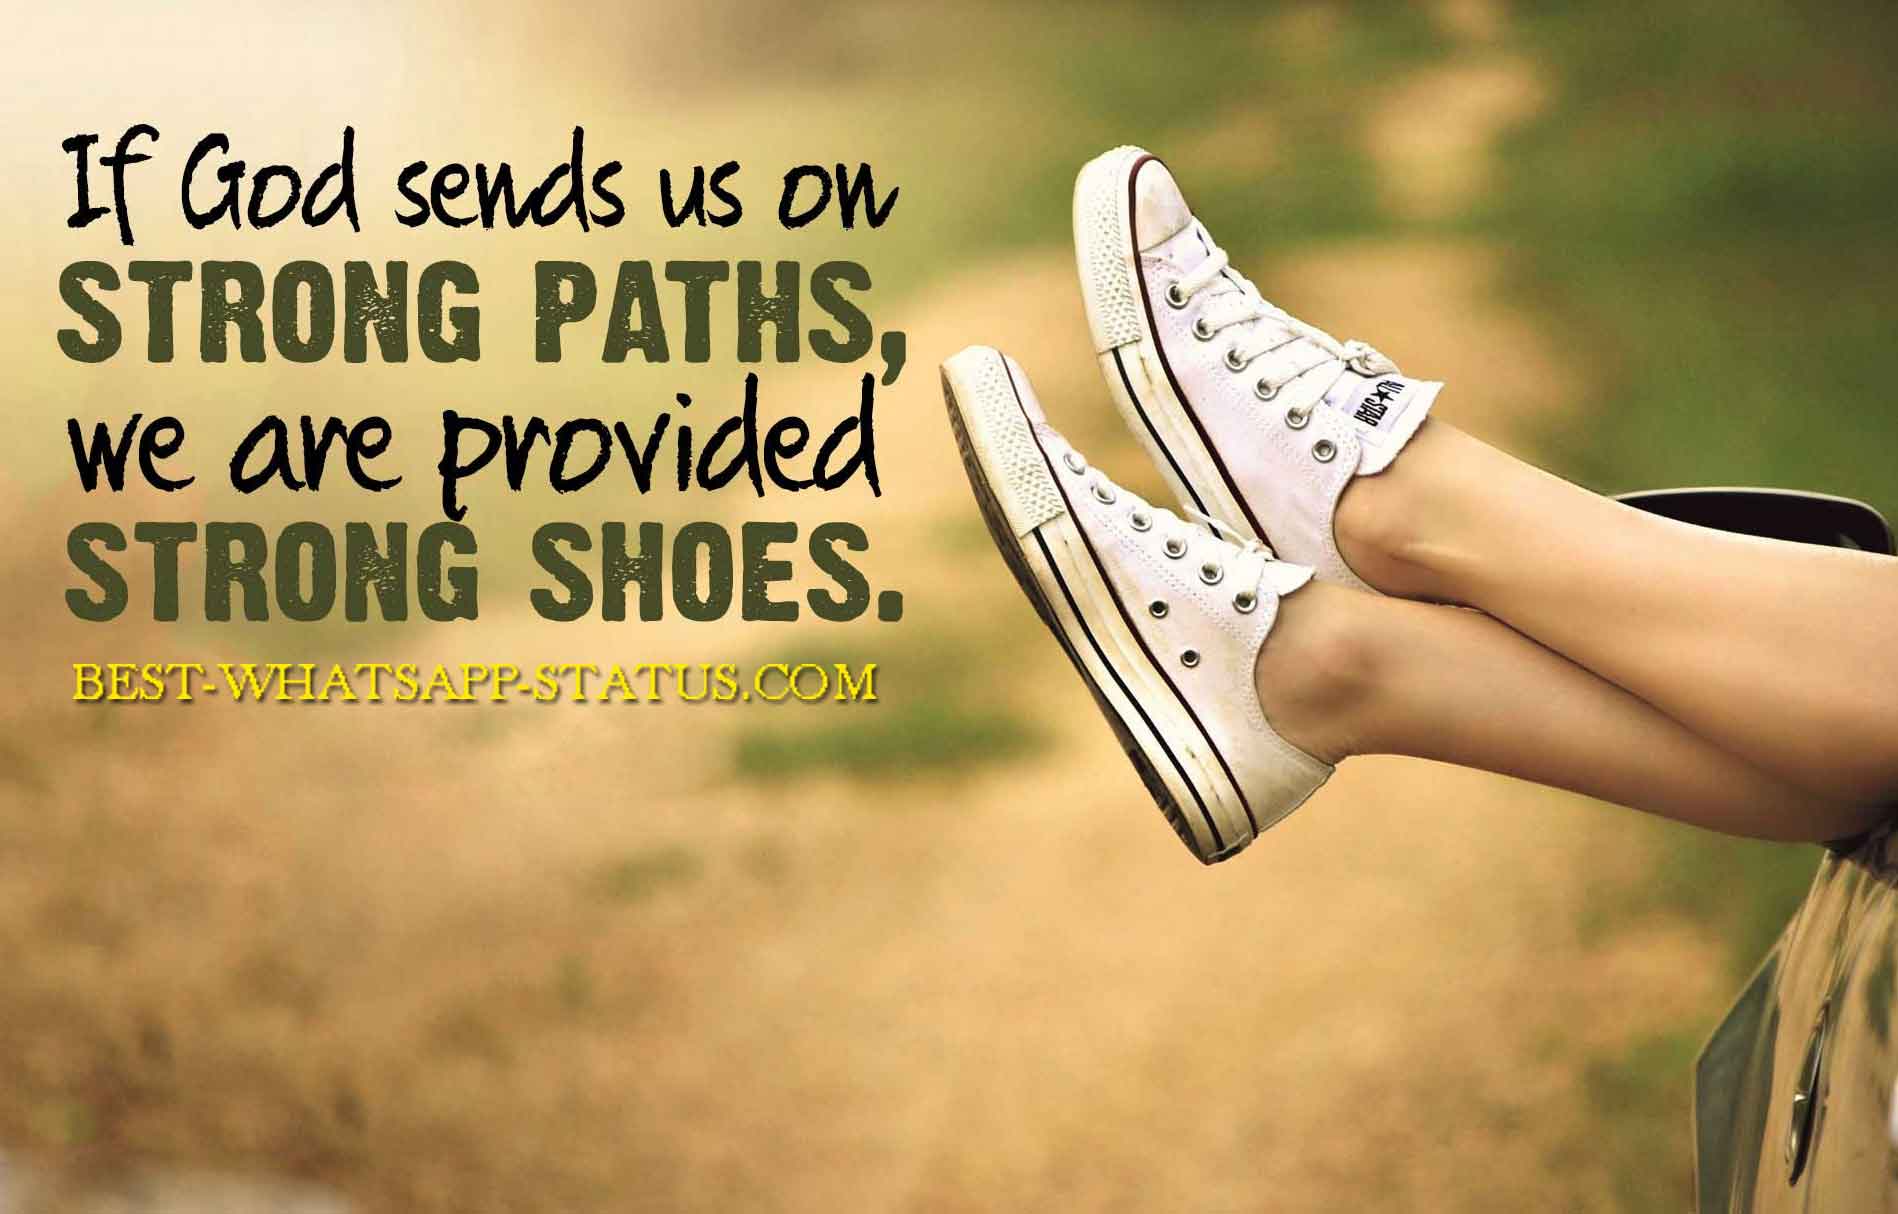 Shoes Quotes - Homecare24